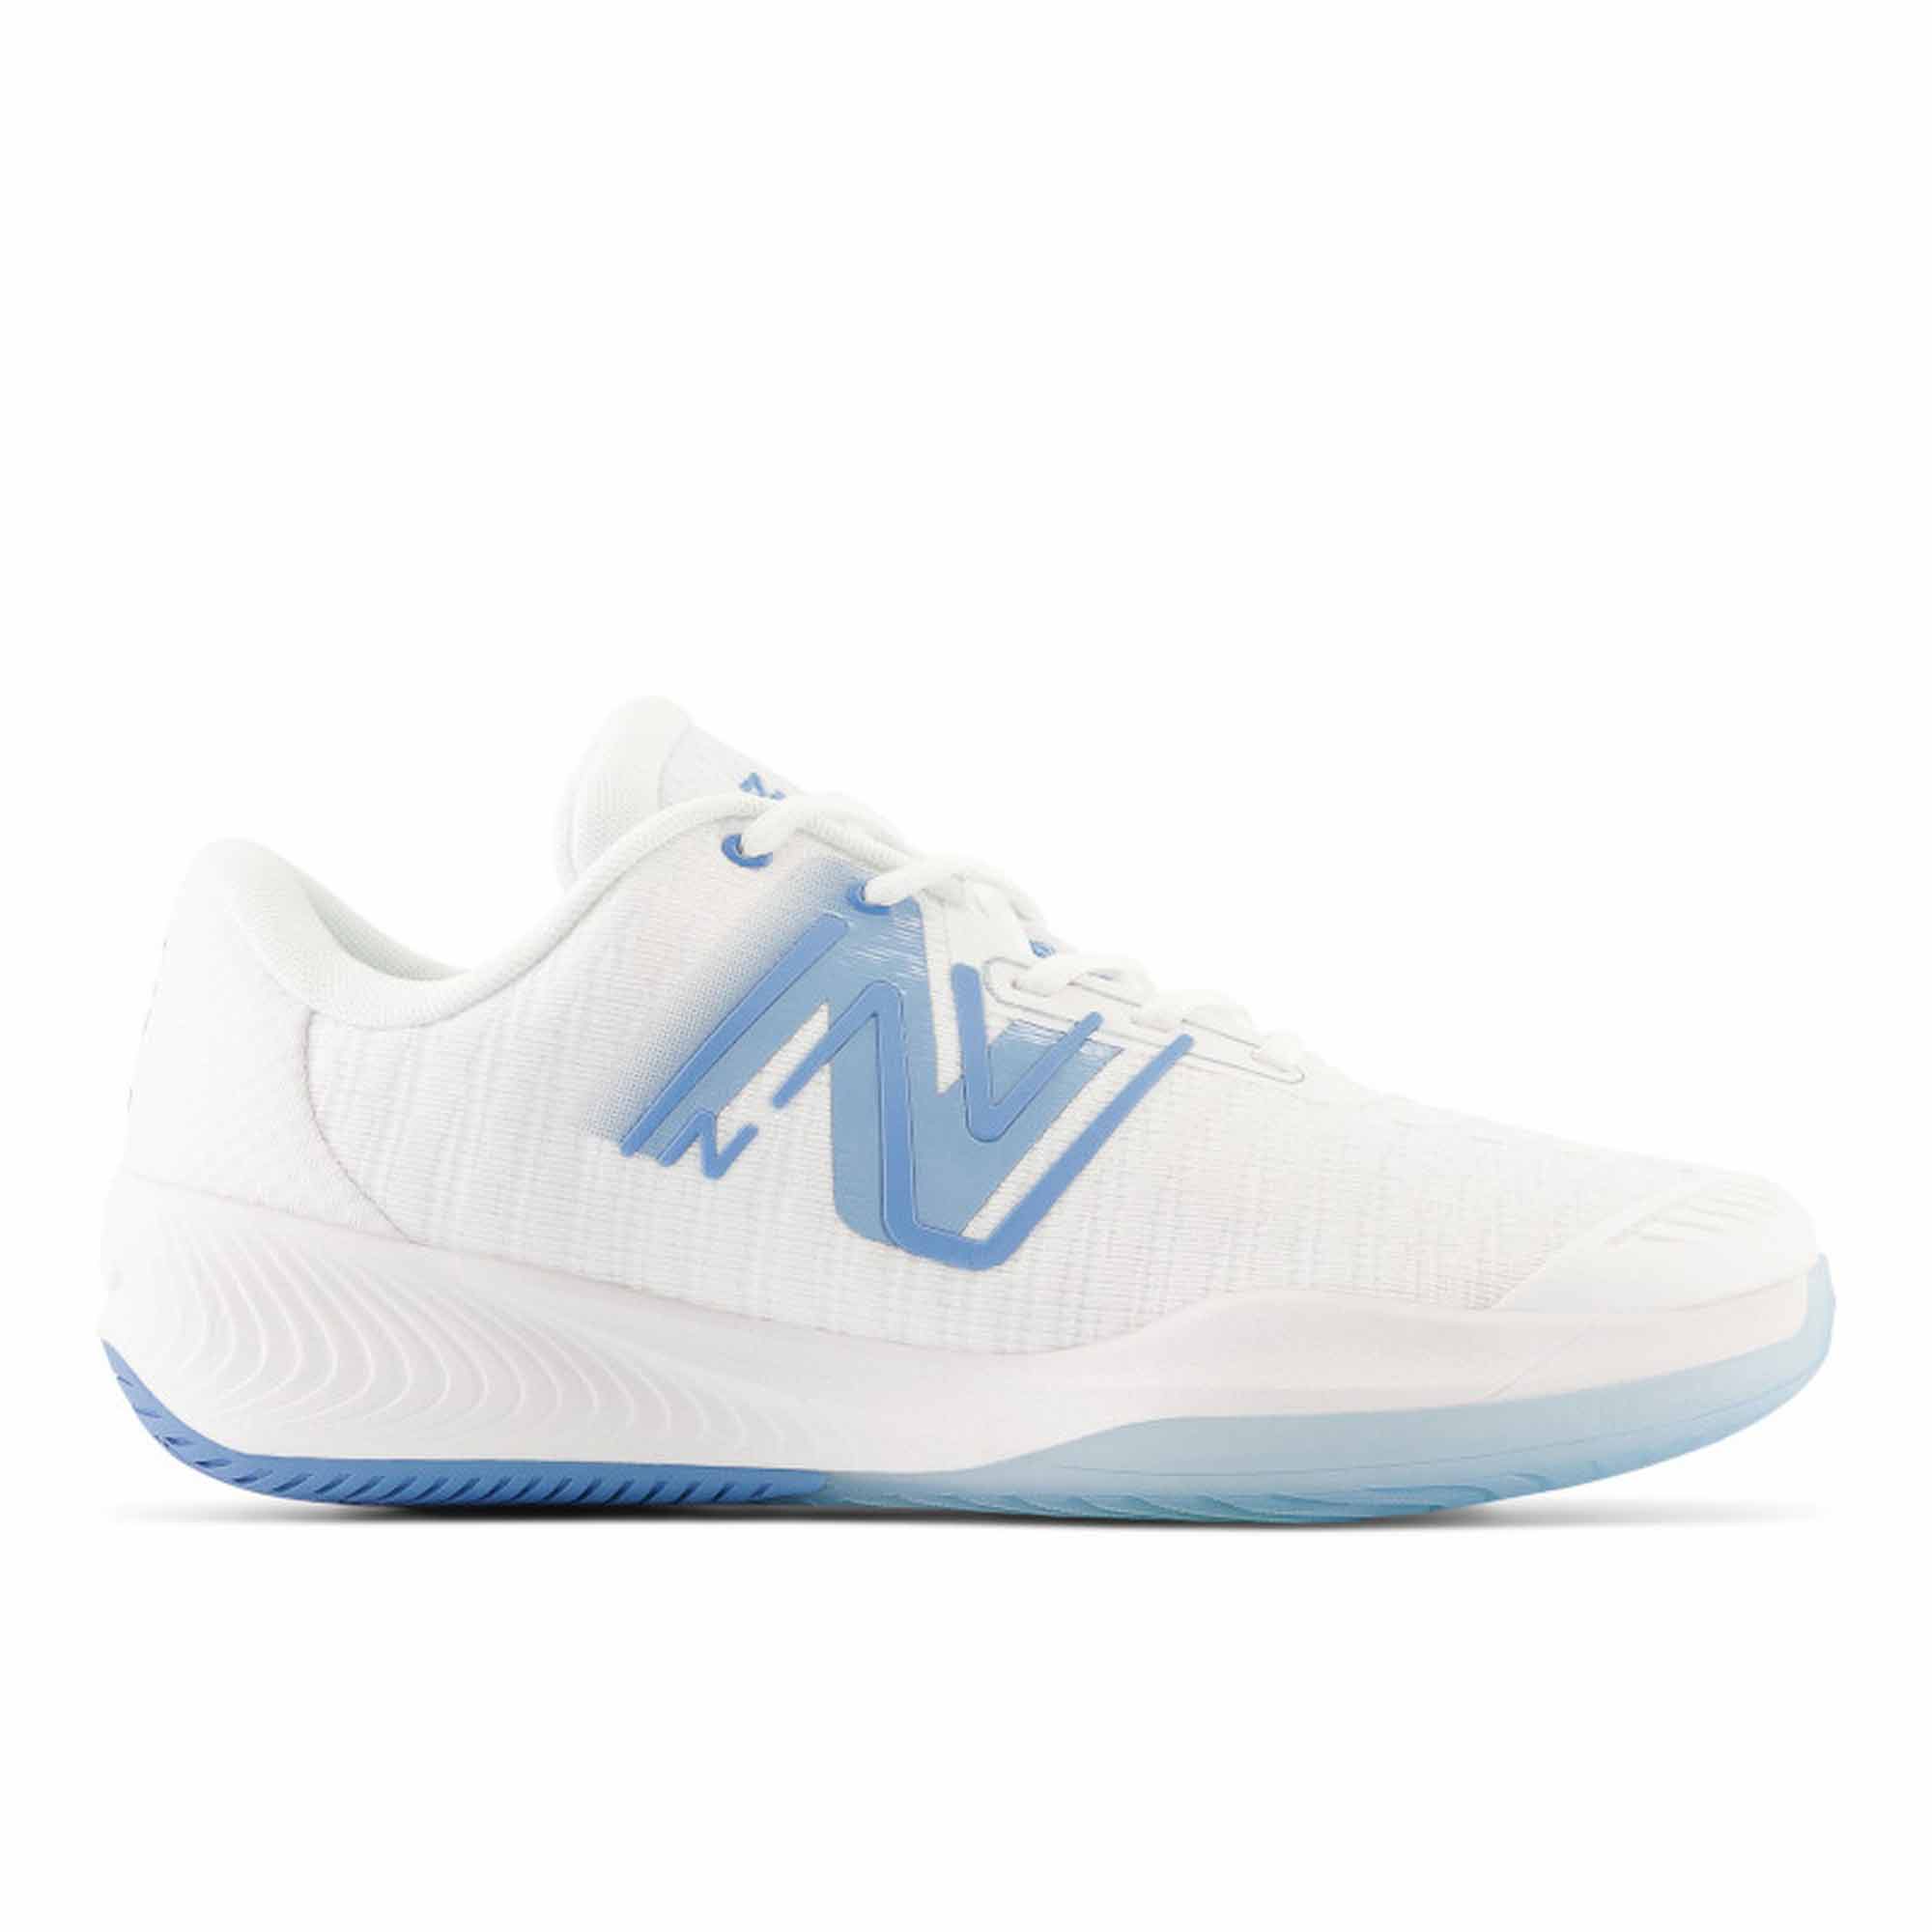 New Balance Womens Fuel Cell 996v6 D Tennis Shoes